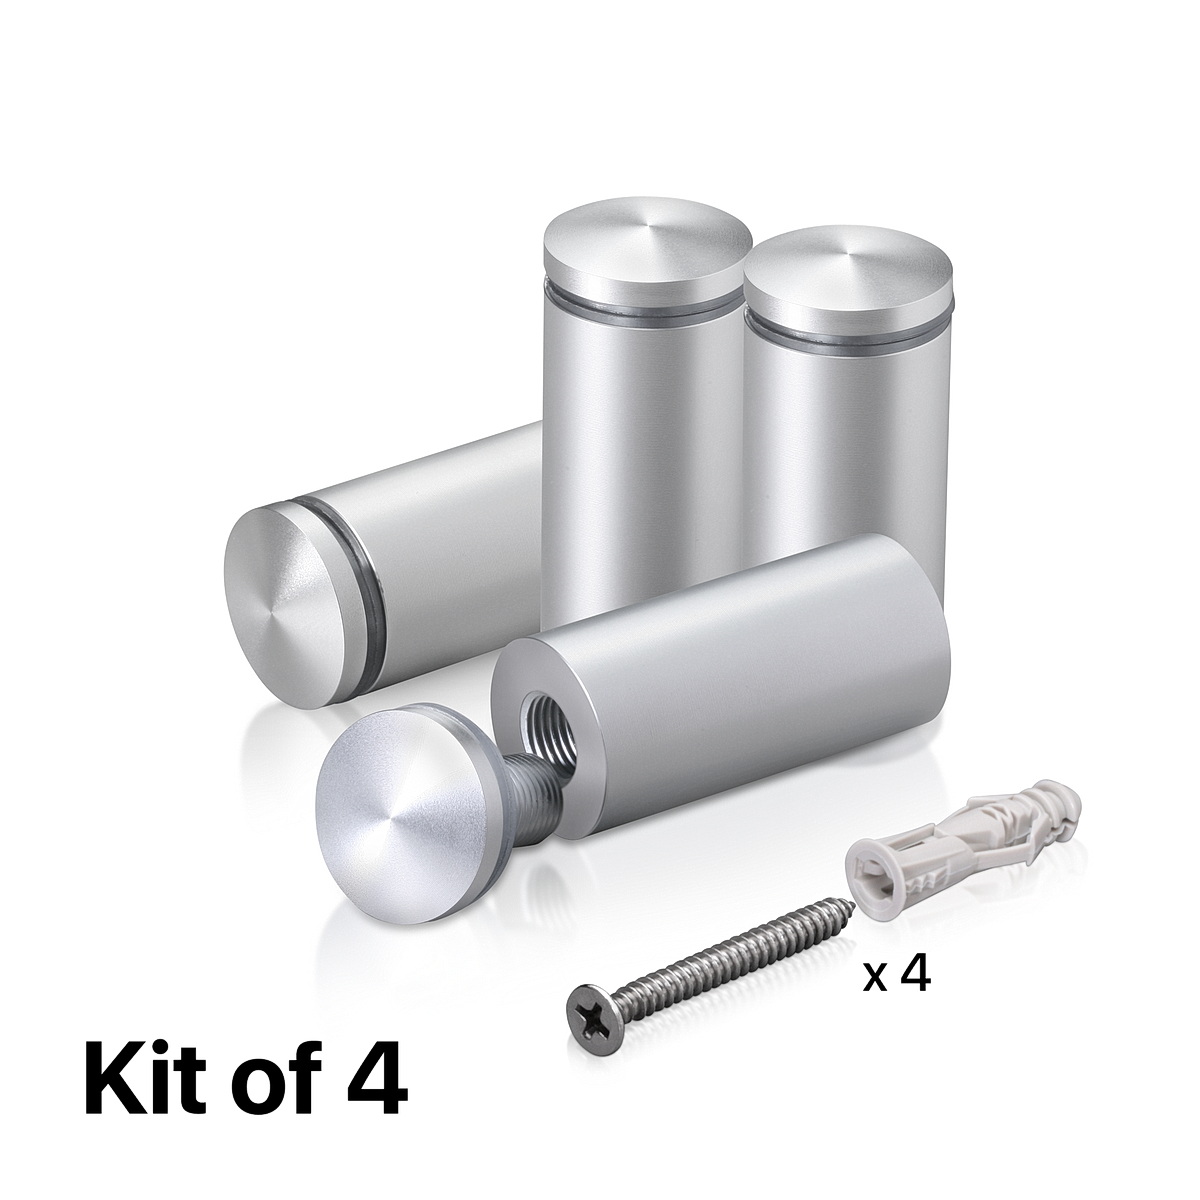 (Set of 4) 7/8'' Diameter X 1-3/4'' Barrel Length, Aluminum Rounded Head Standoffs, Clear Anodized Finish Standoff with (4) 2216Z Screws and (4) LANC1 Anchors for concrete or drywall (For Inside / Outside use) [Required Material Hole Size: 7/16'']